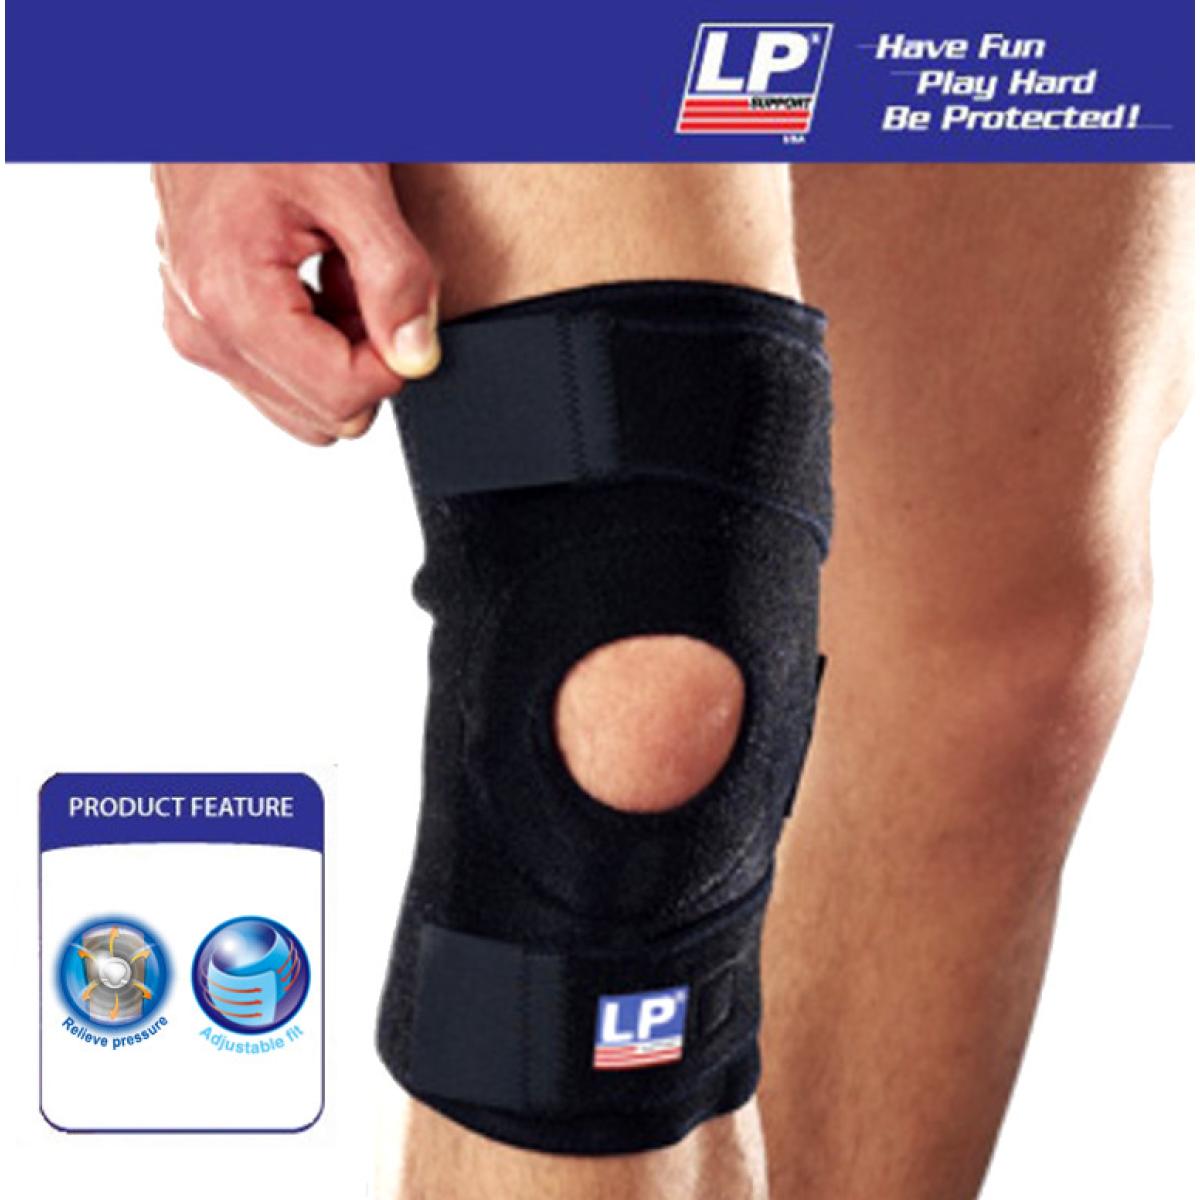 https://www.badmintonbay.com.my/image/cache/data/lpsupport/758-knee-support/lp-support-758-open-patella-knee-support-00-1200x1200.jpg